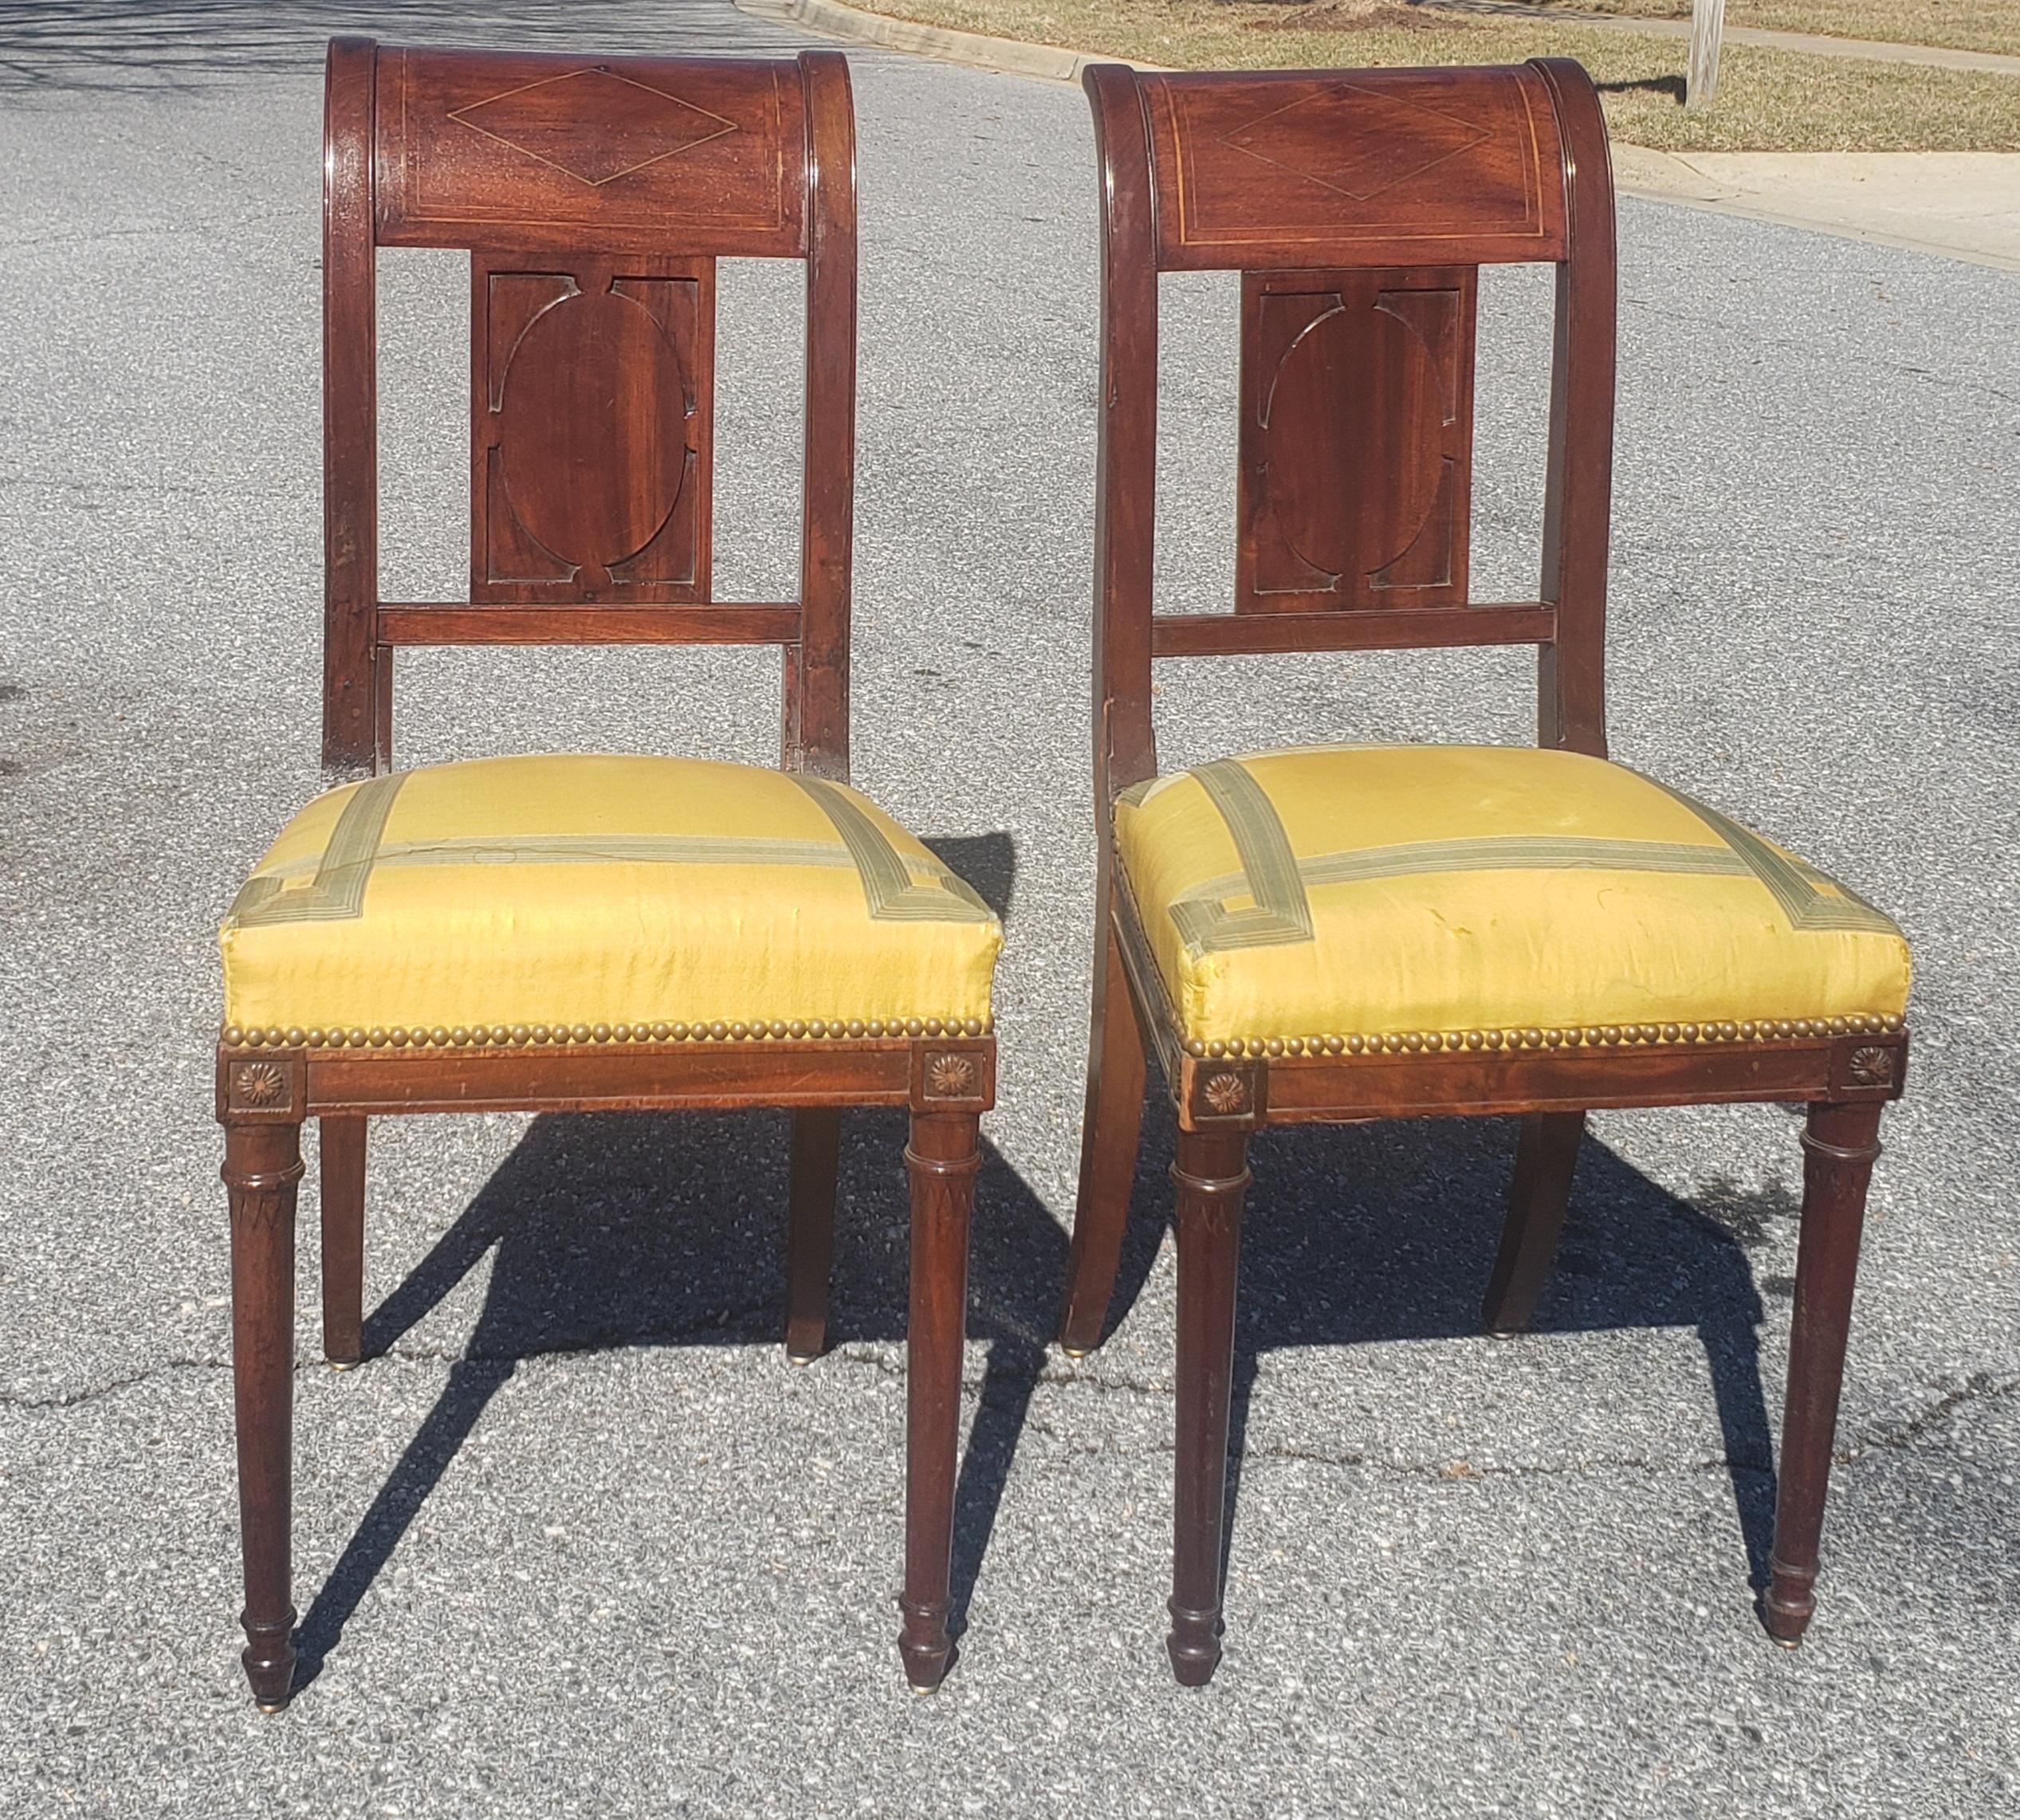 A rare pair of continental mahogany and brass inlay upholstered side chairs attributed to the famous French cabinet maker Georges Jacob. Very firm, reupholstered seats with springs. We have a total of 4 in our inventory, two separatedly listed as